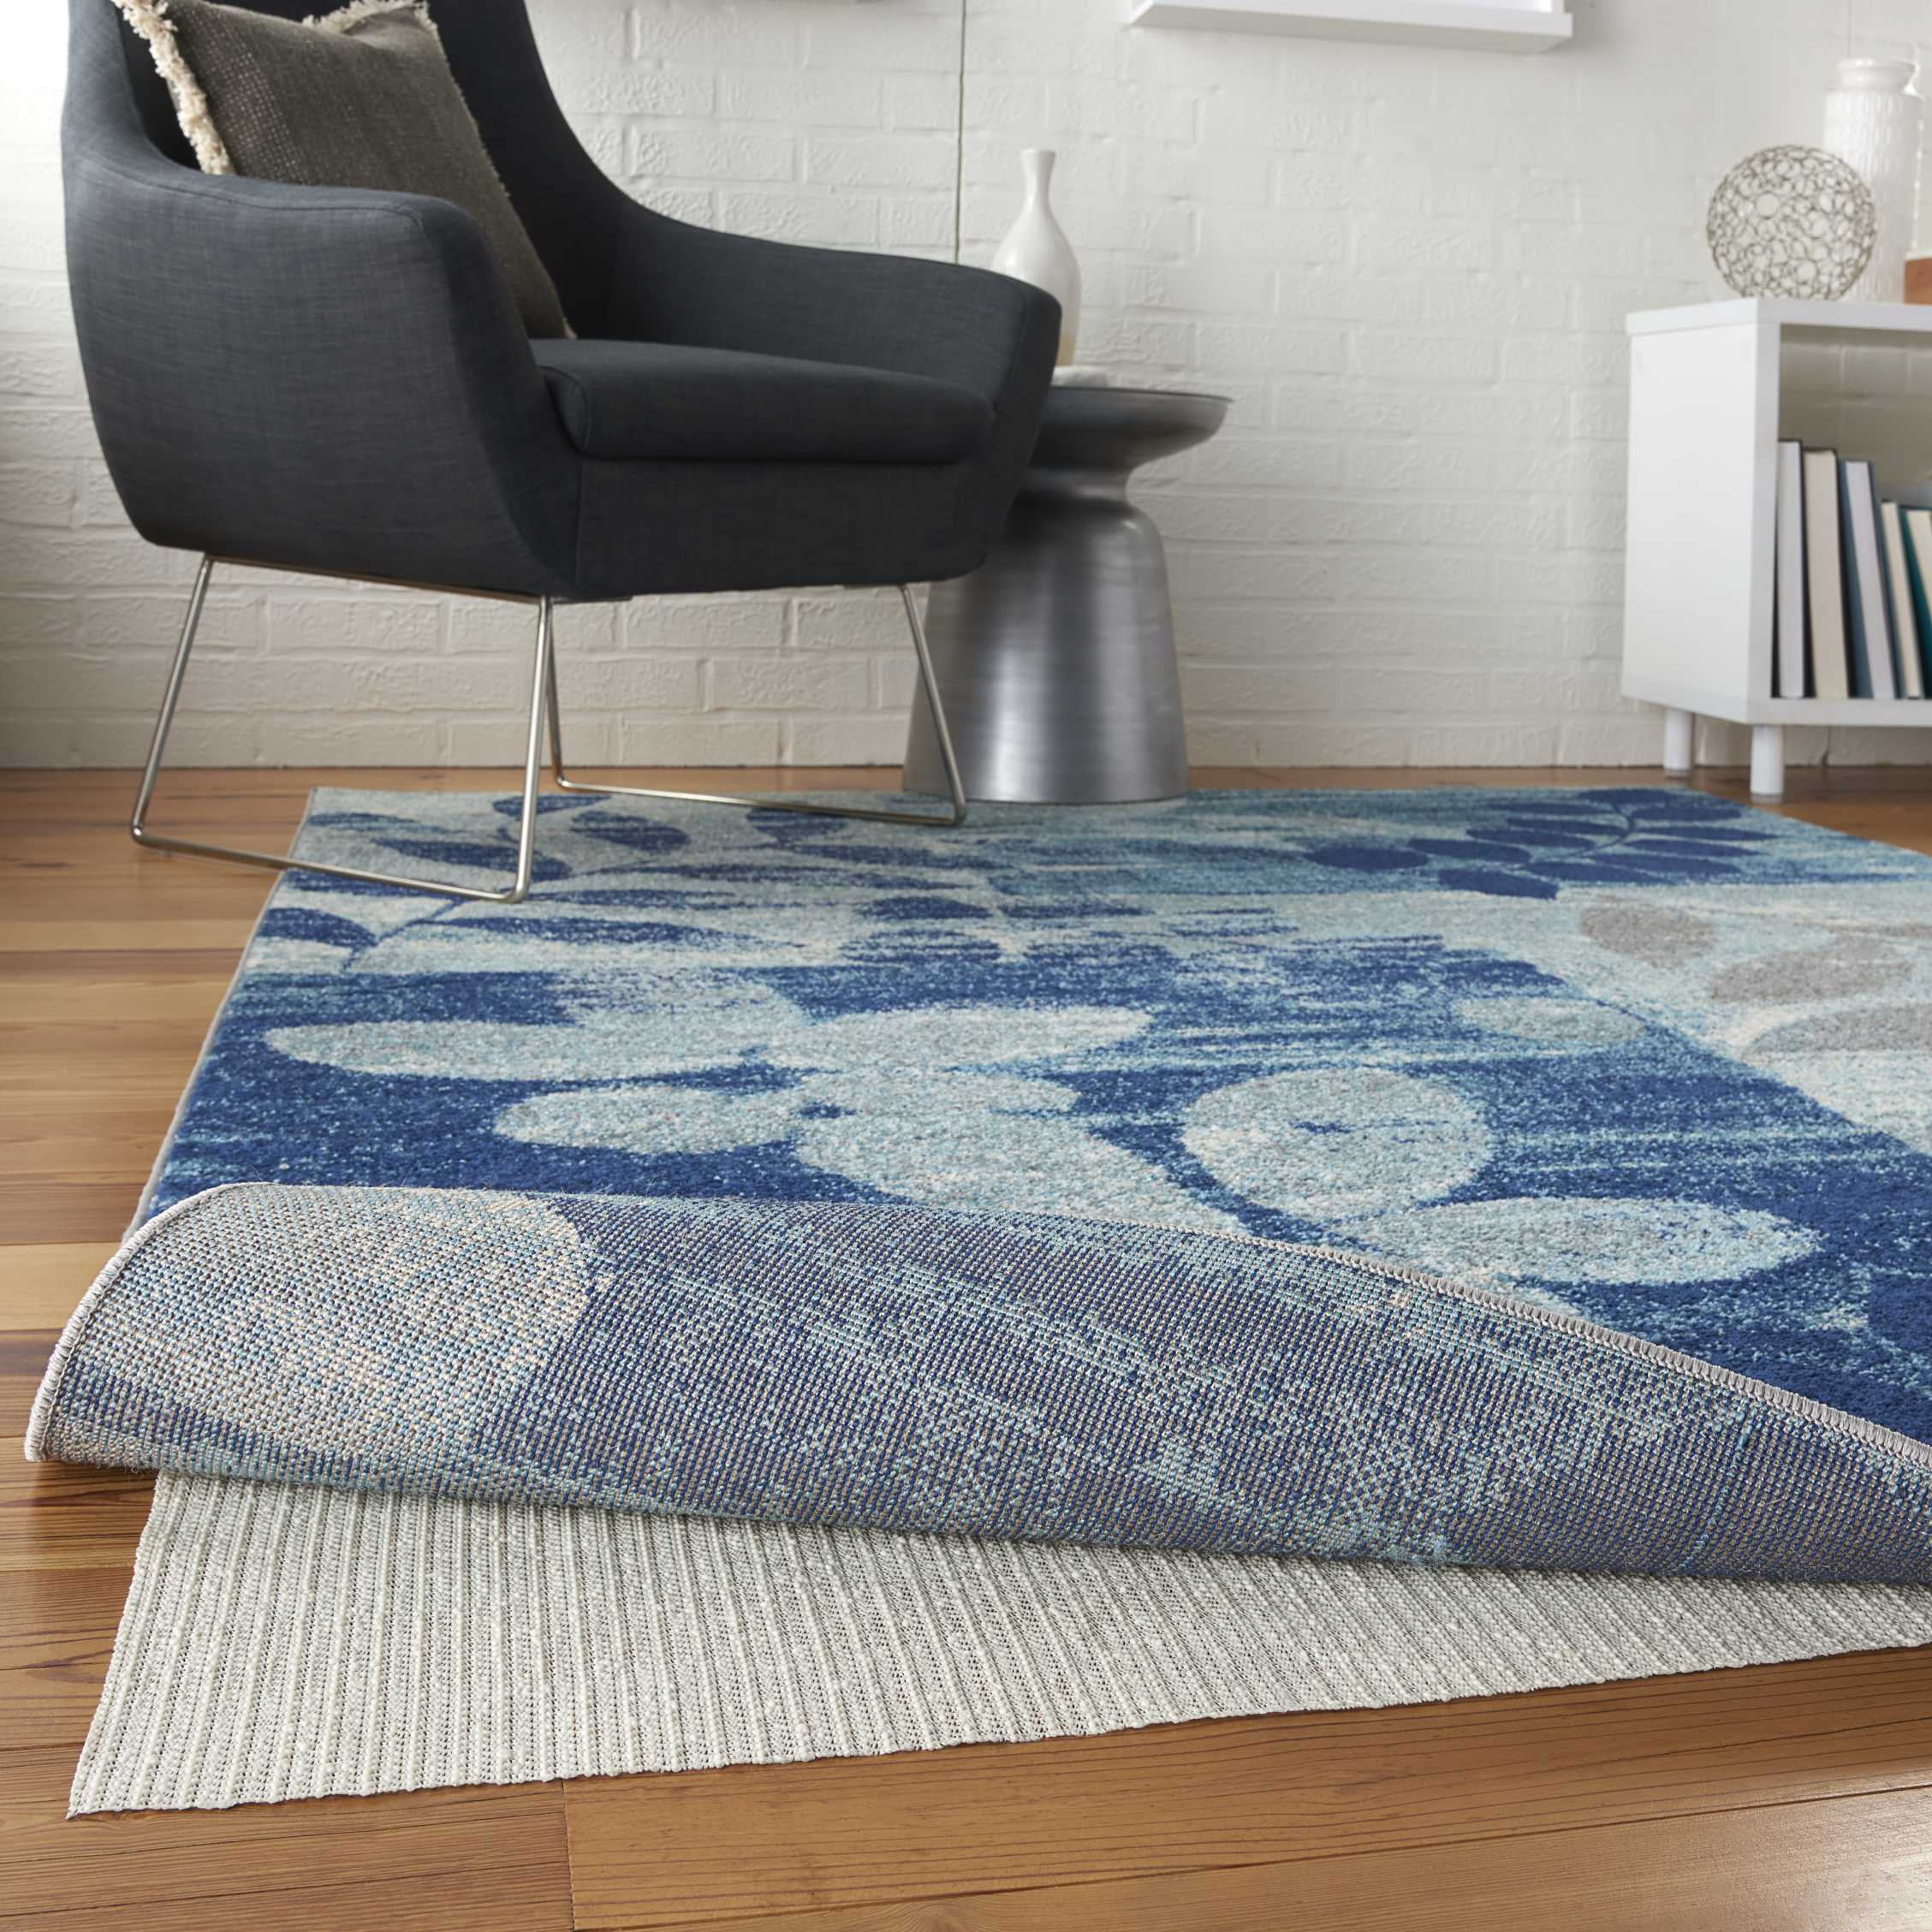 Great Deals On Flexible And Durable Wholesale instabind carpet